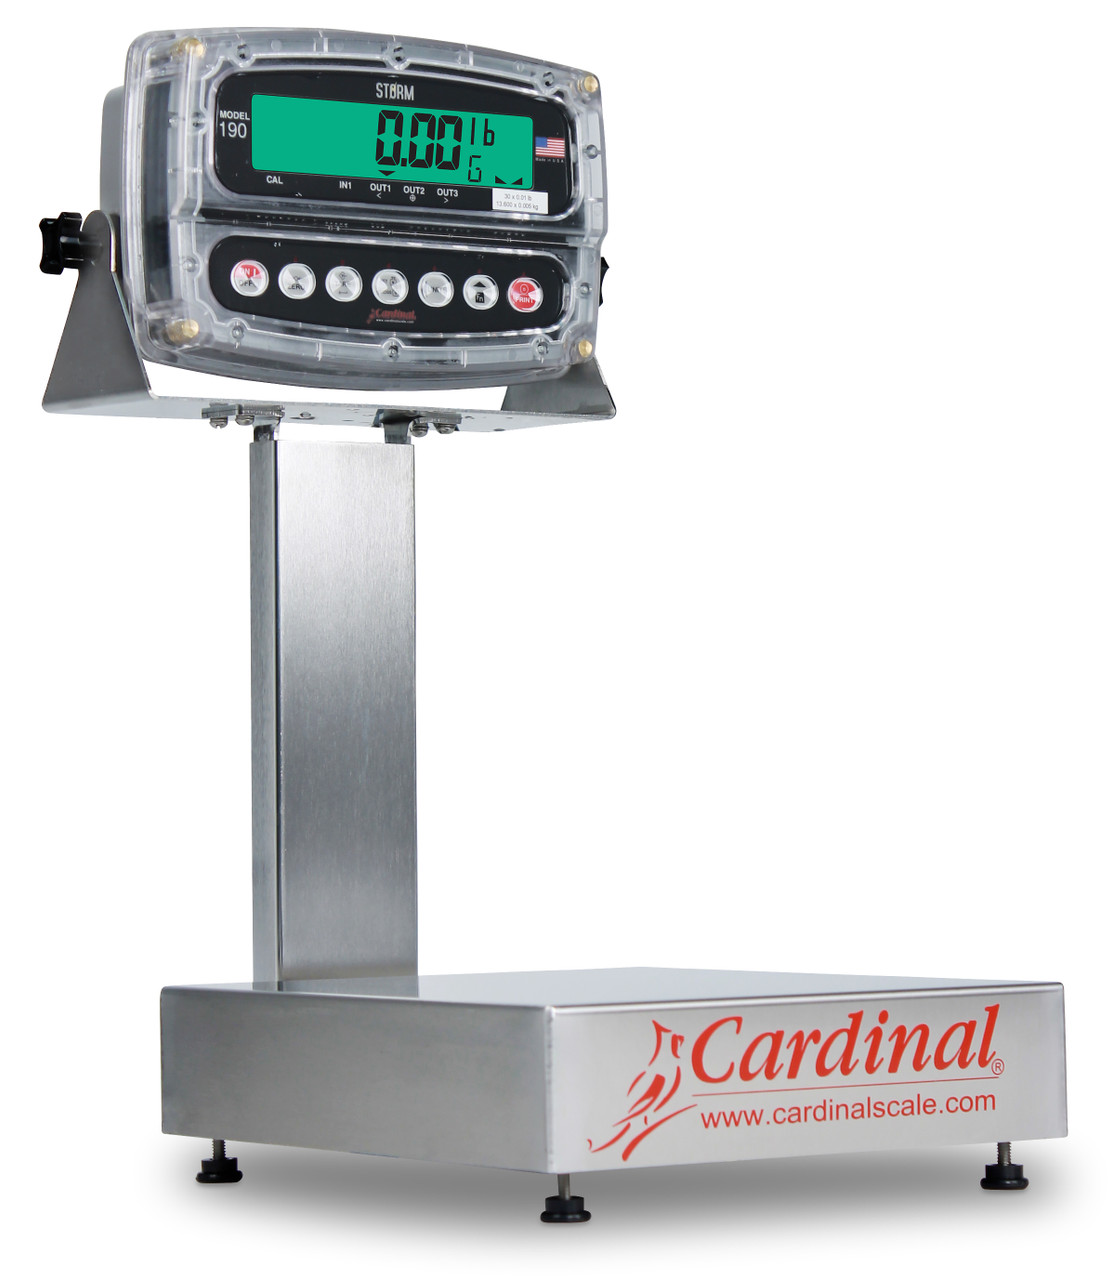 Cardinal Detecto 300 Lb Electronic Bench Scale 24" x 20" Stainless Steel 190 Indicator, Model# EB-300-190